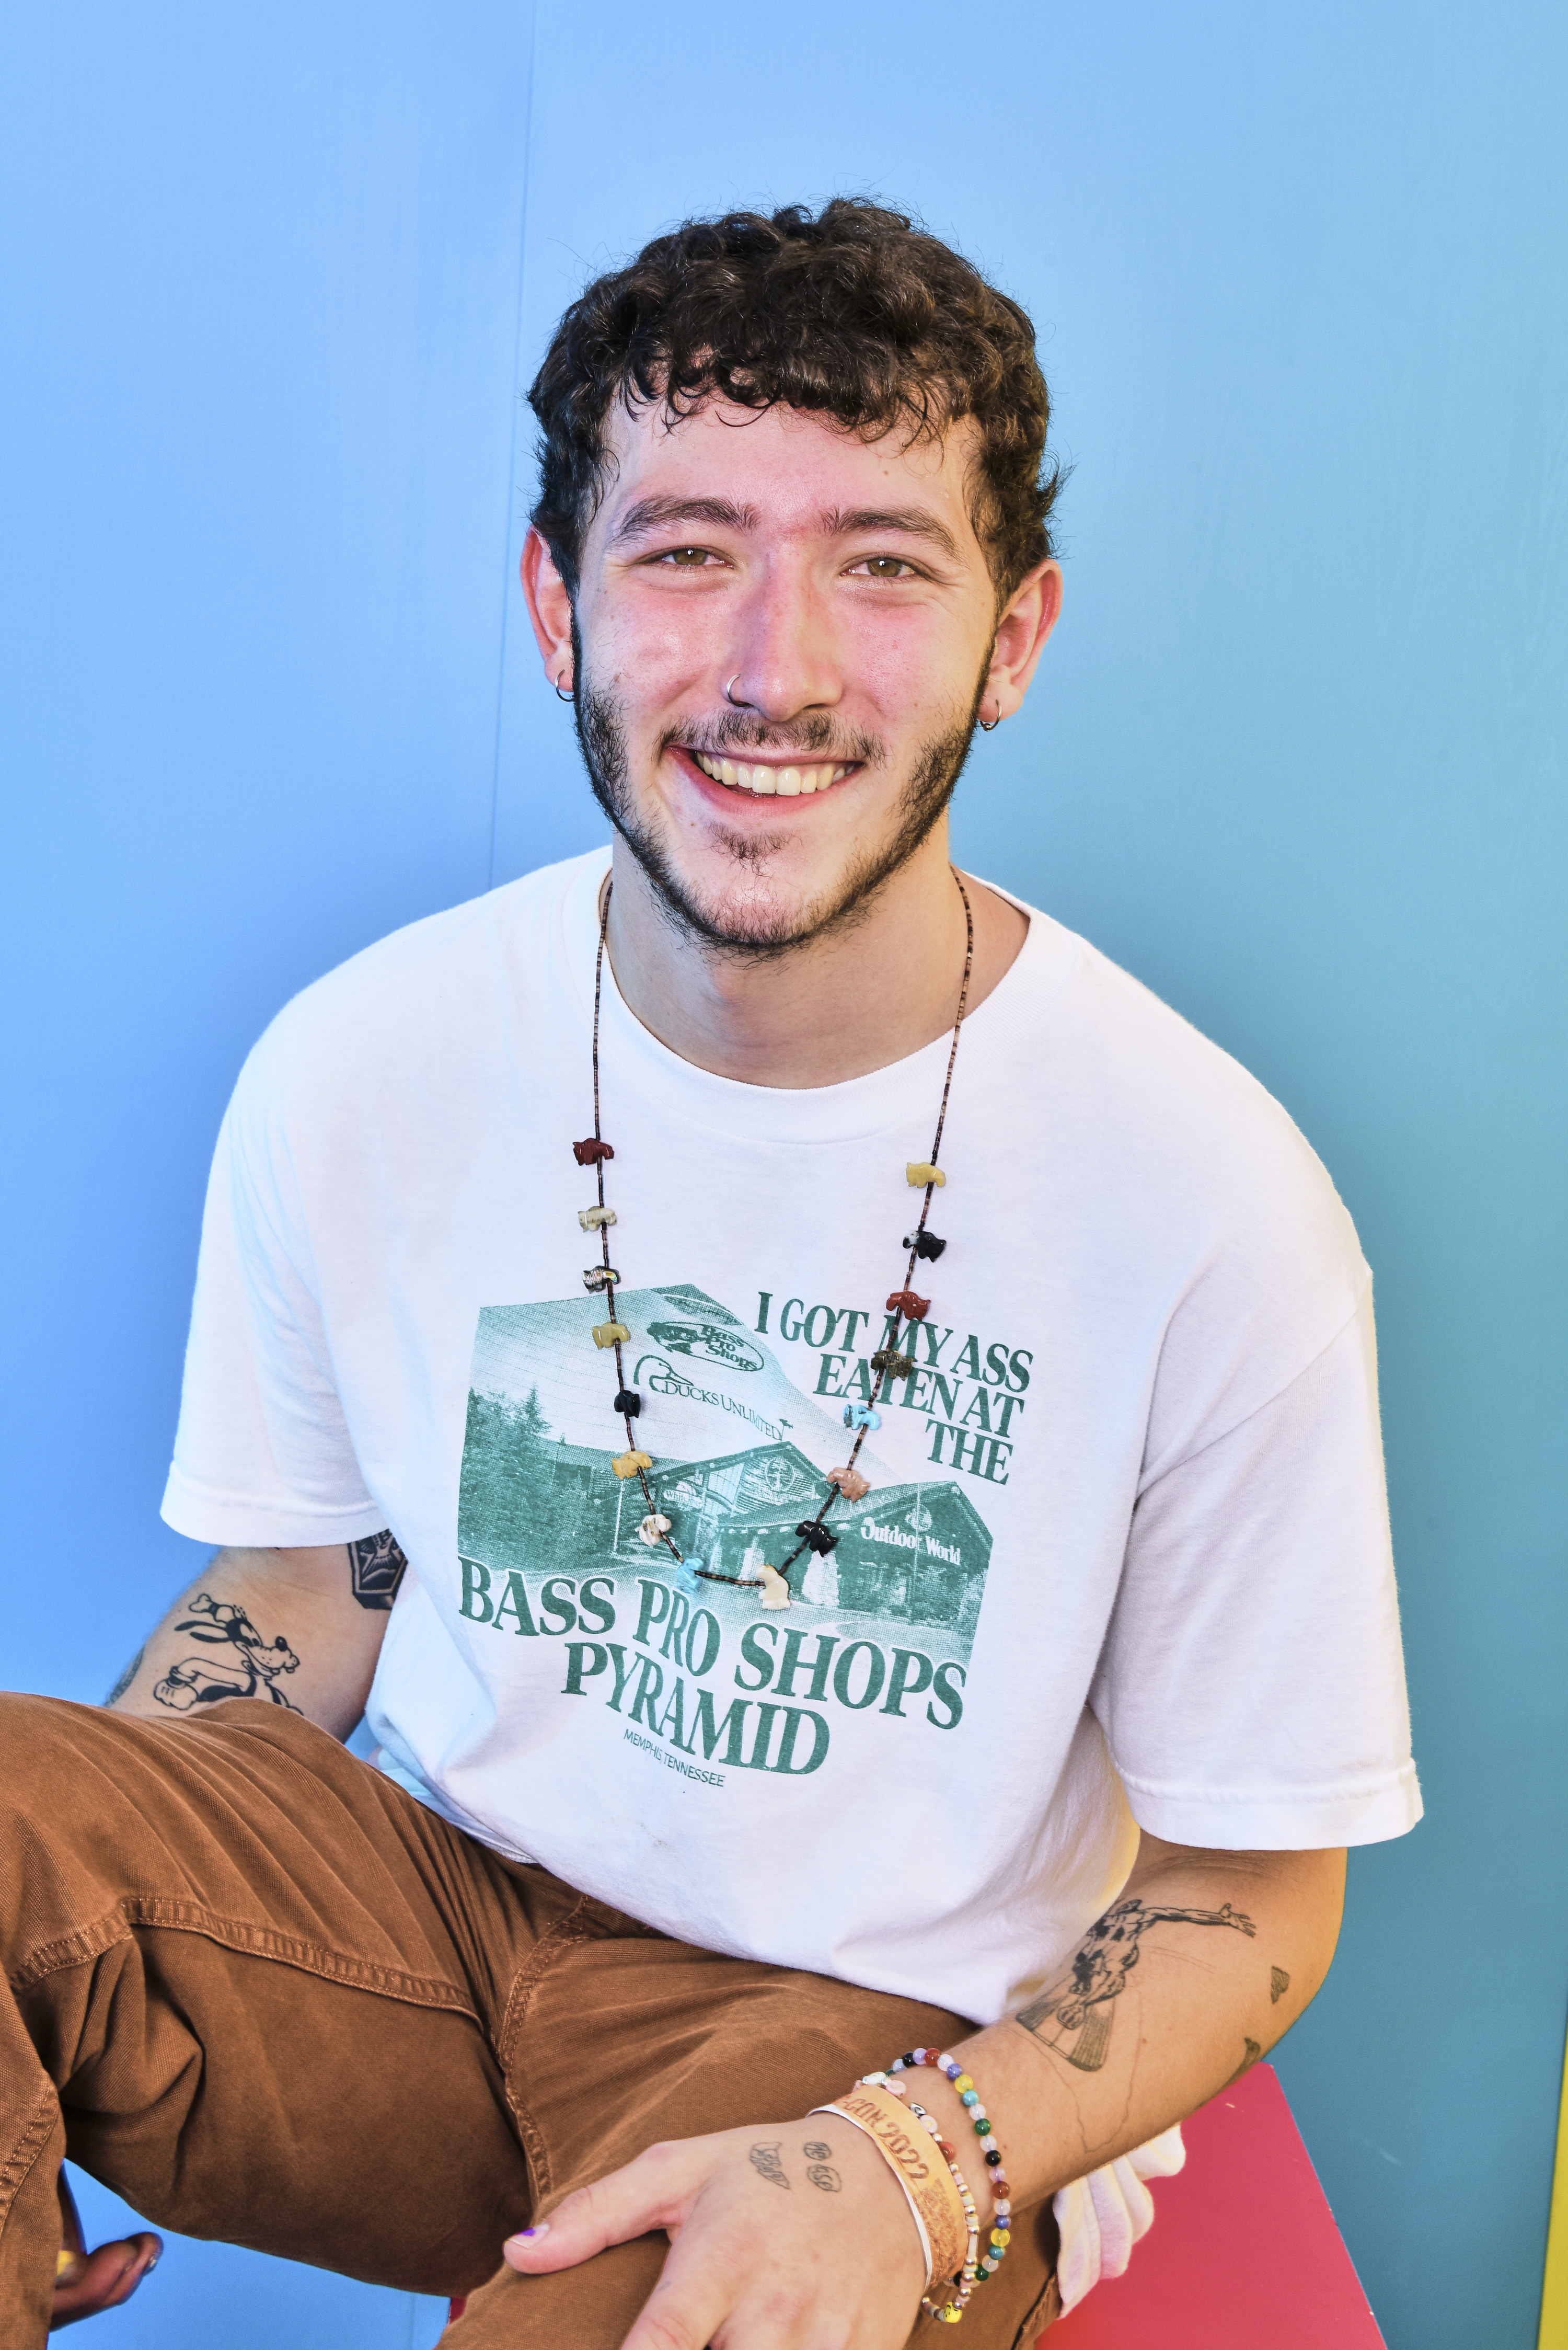 Close-up of Frankie smiling and wearing an &quot;I Got My Ass Eaten at the Bass Pro Shops Pyramid&quot; T-shirt